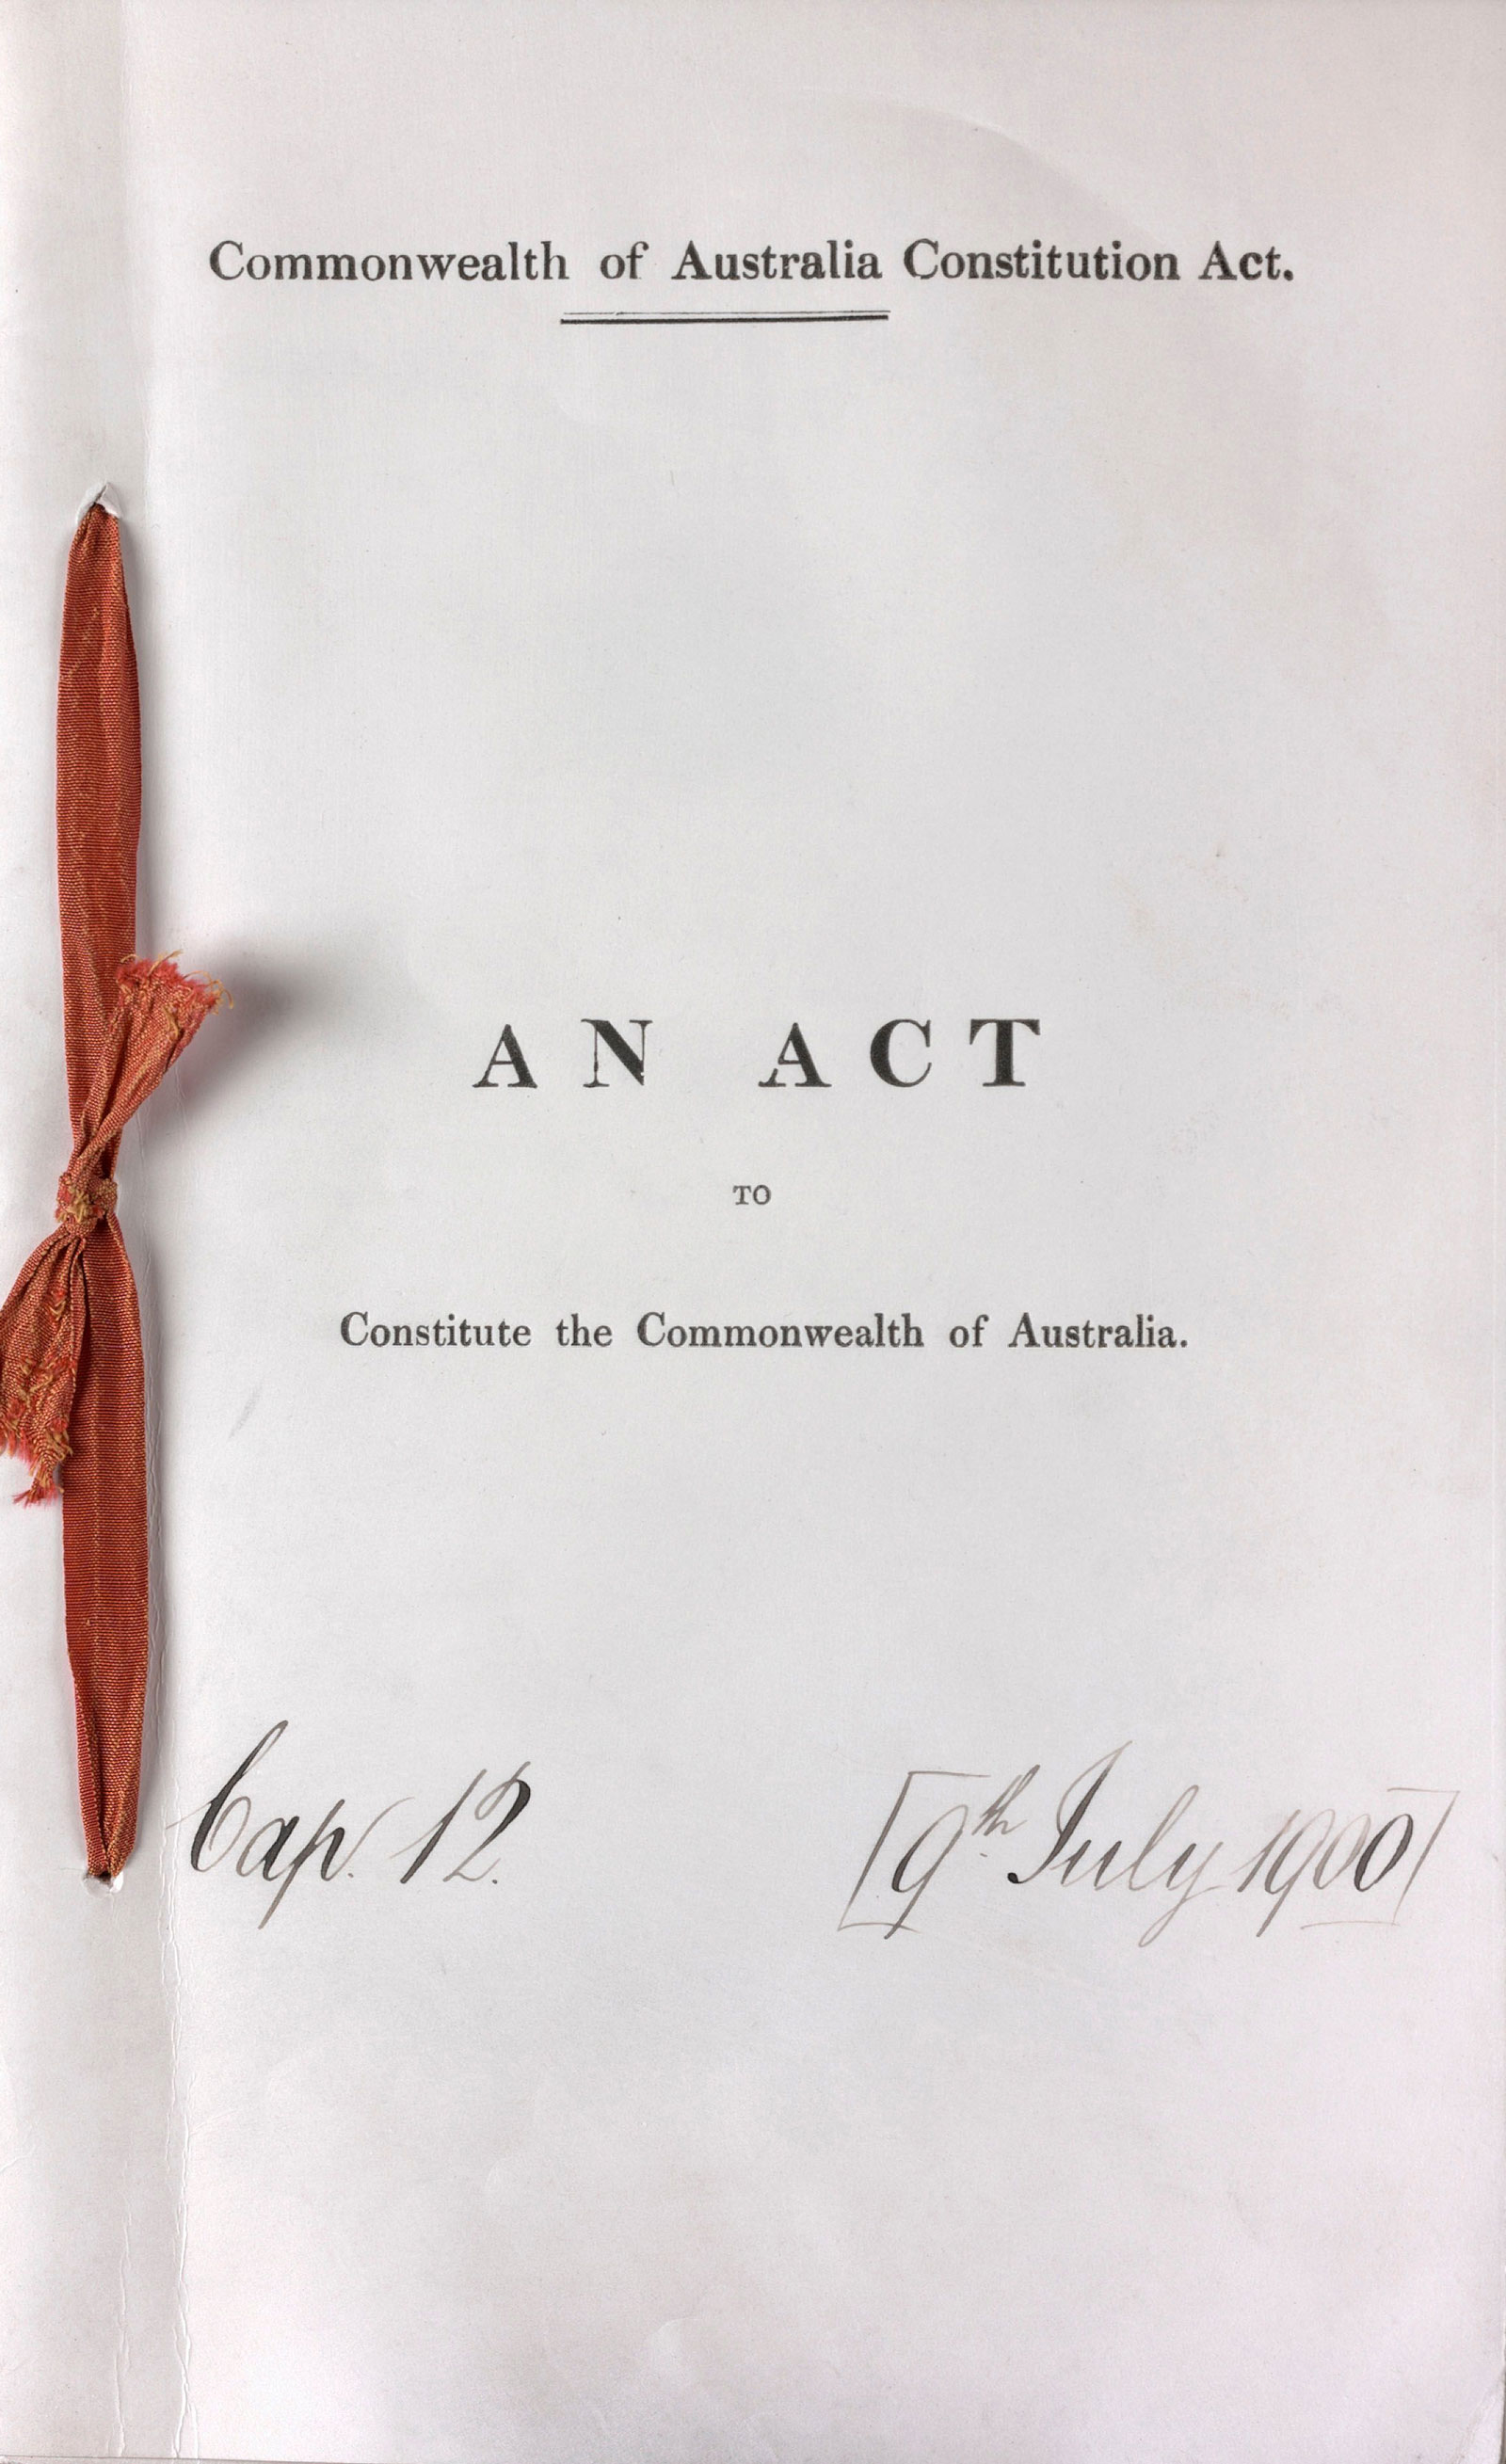 Australia since Defining Moments, | 1.7 Making book — the Constitution | Australia's Defining Moments Digital Classroom | National Museum of Australia